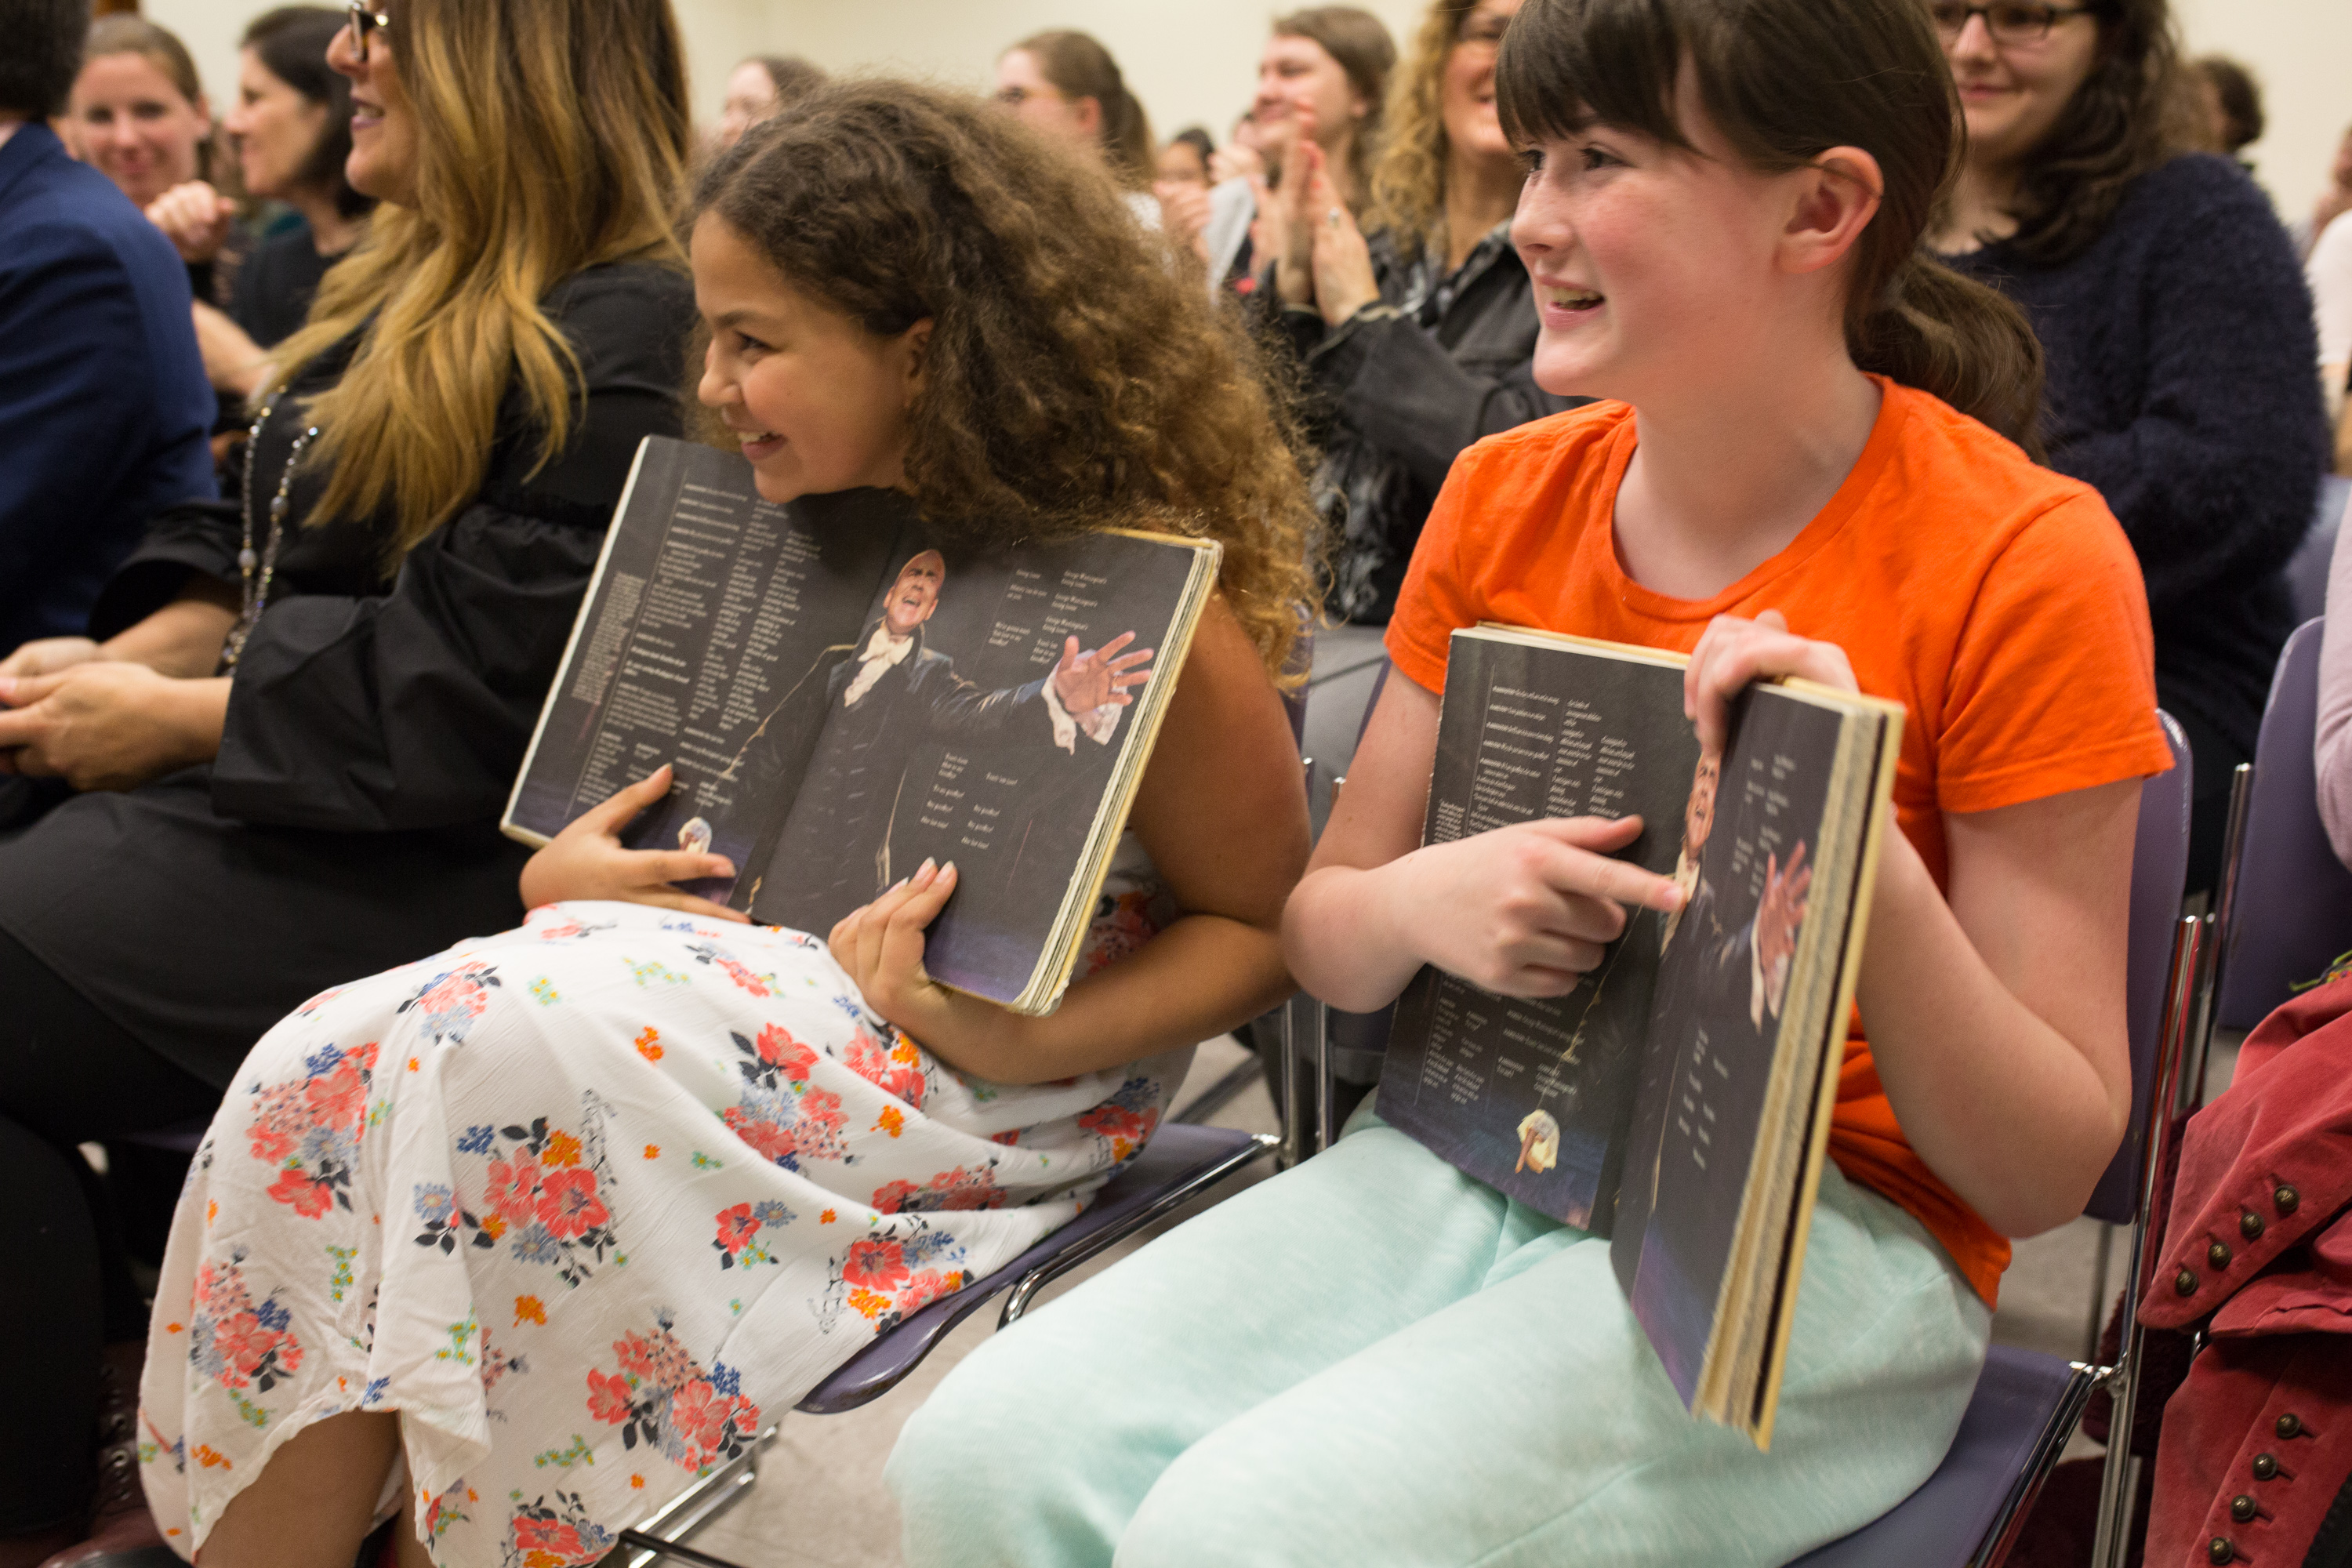 Two young girls hold open a page of the "Hamilton" book with Christopher Jackson's picture.